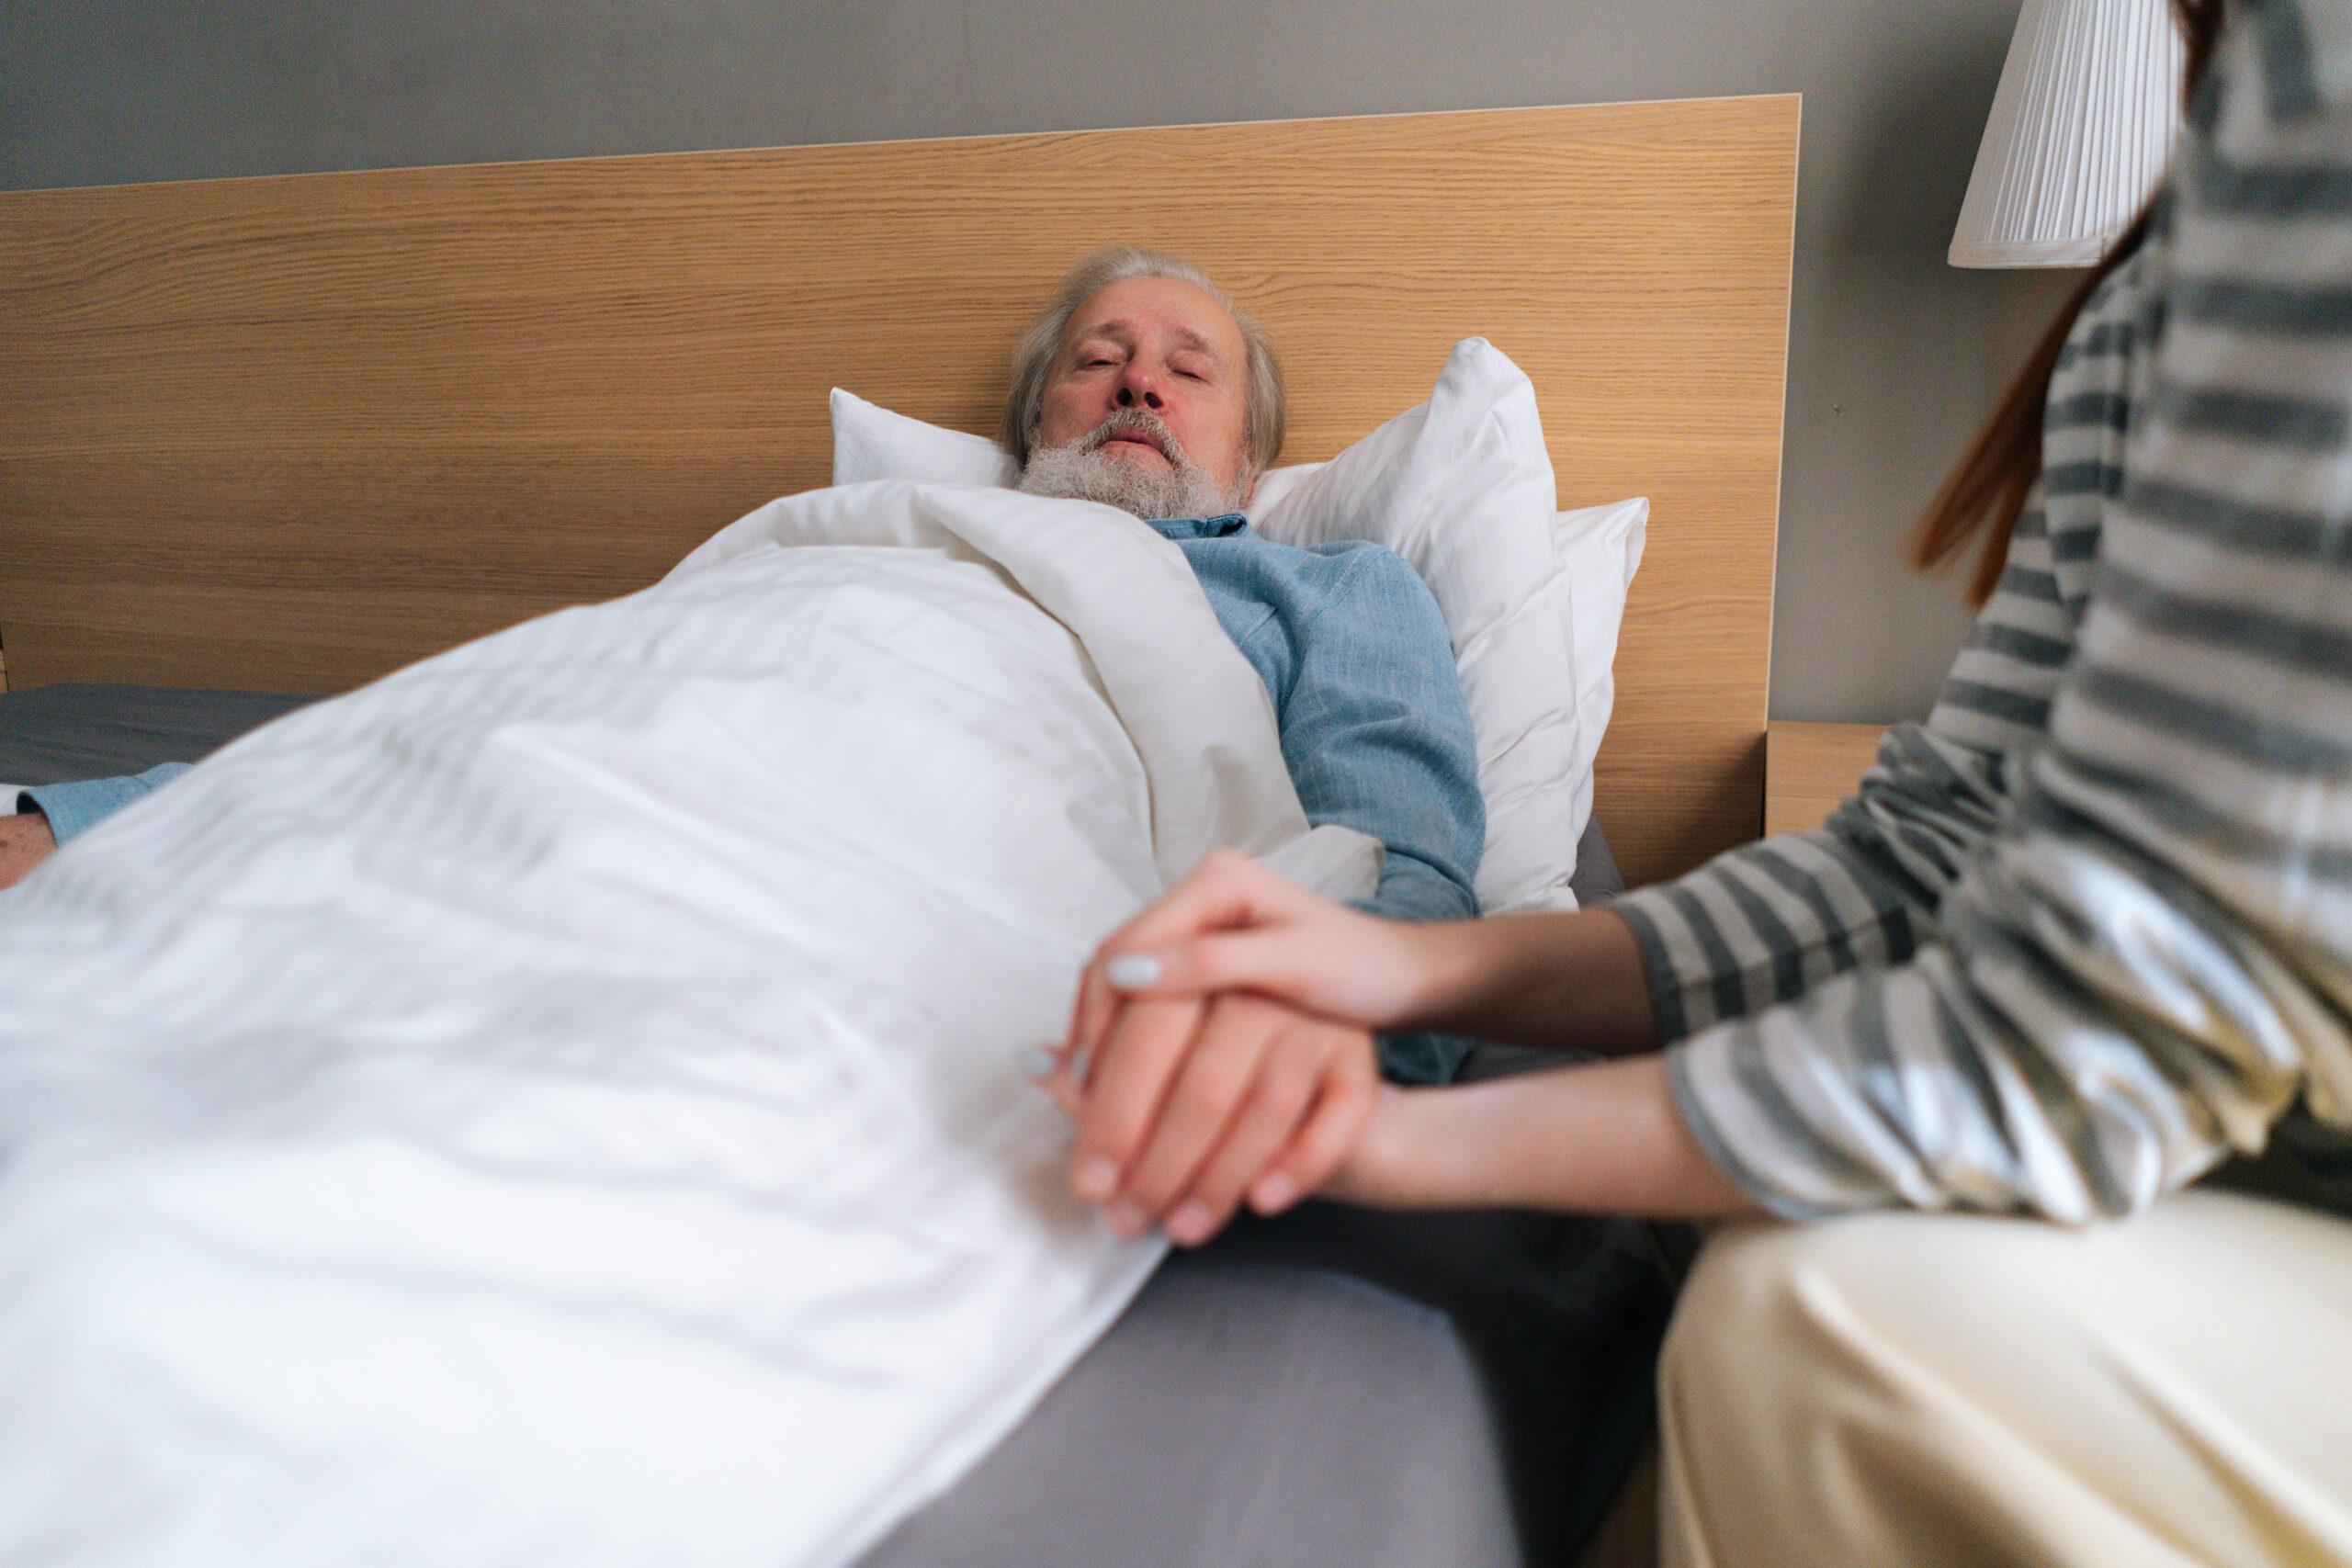 Recognizing Increased Drowsiness and Unresponsiveness in Hospice Patients